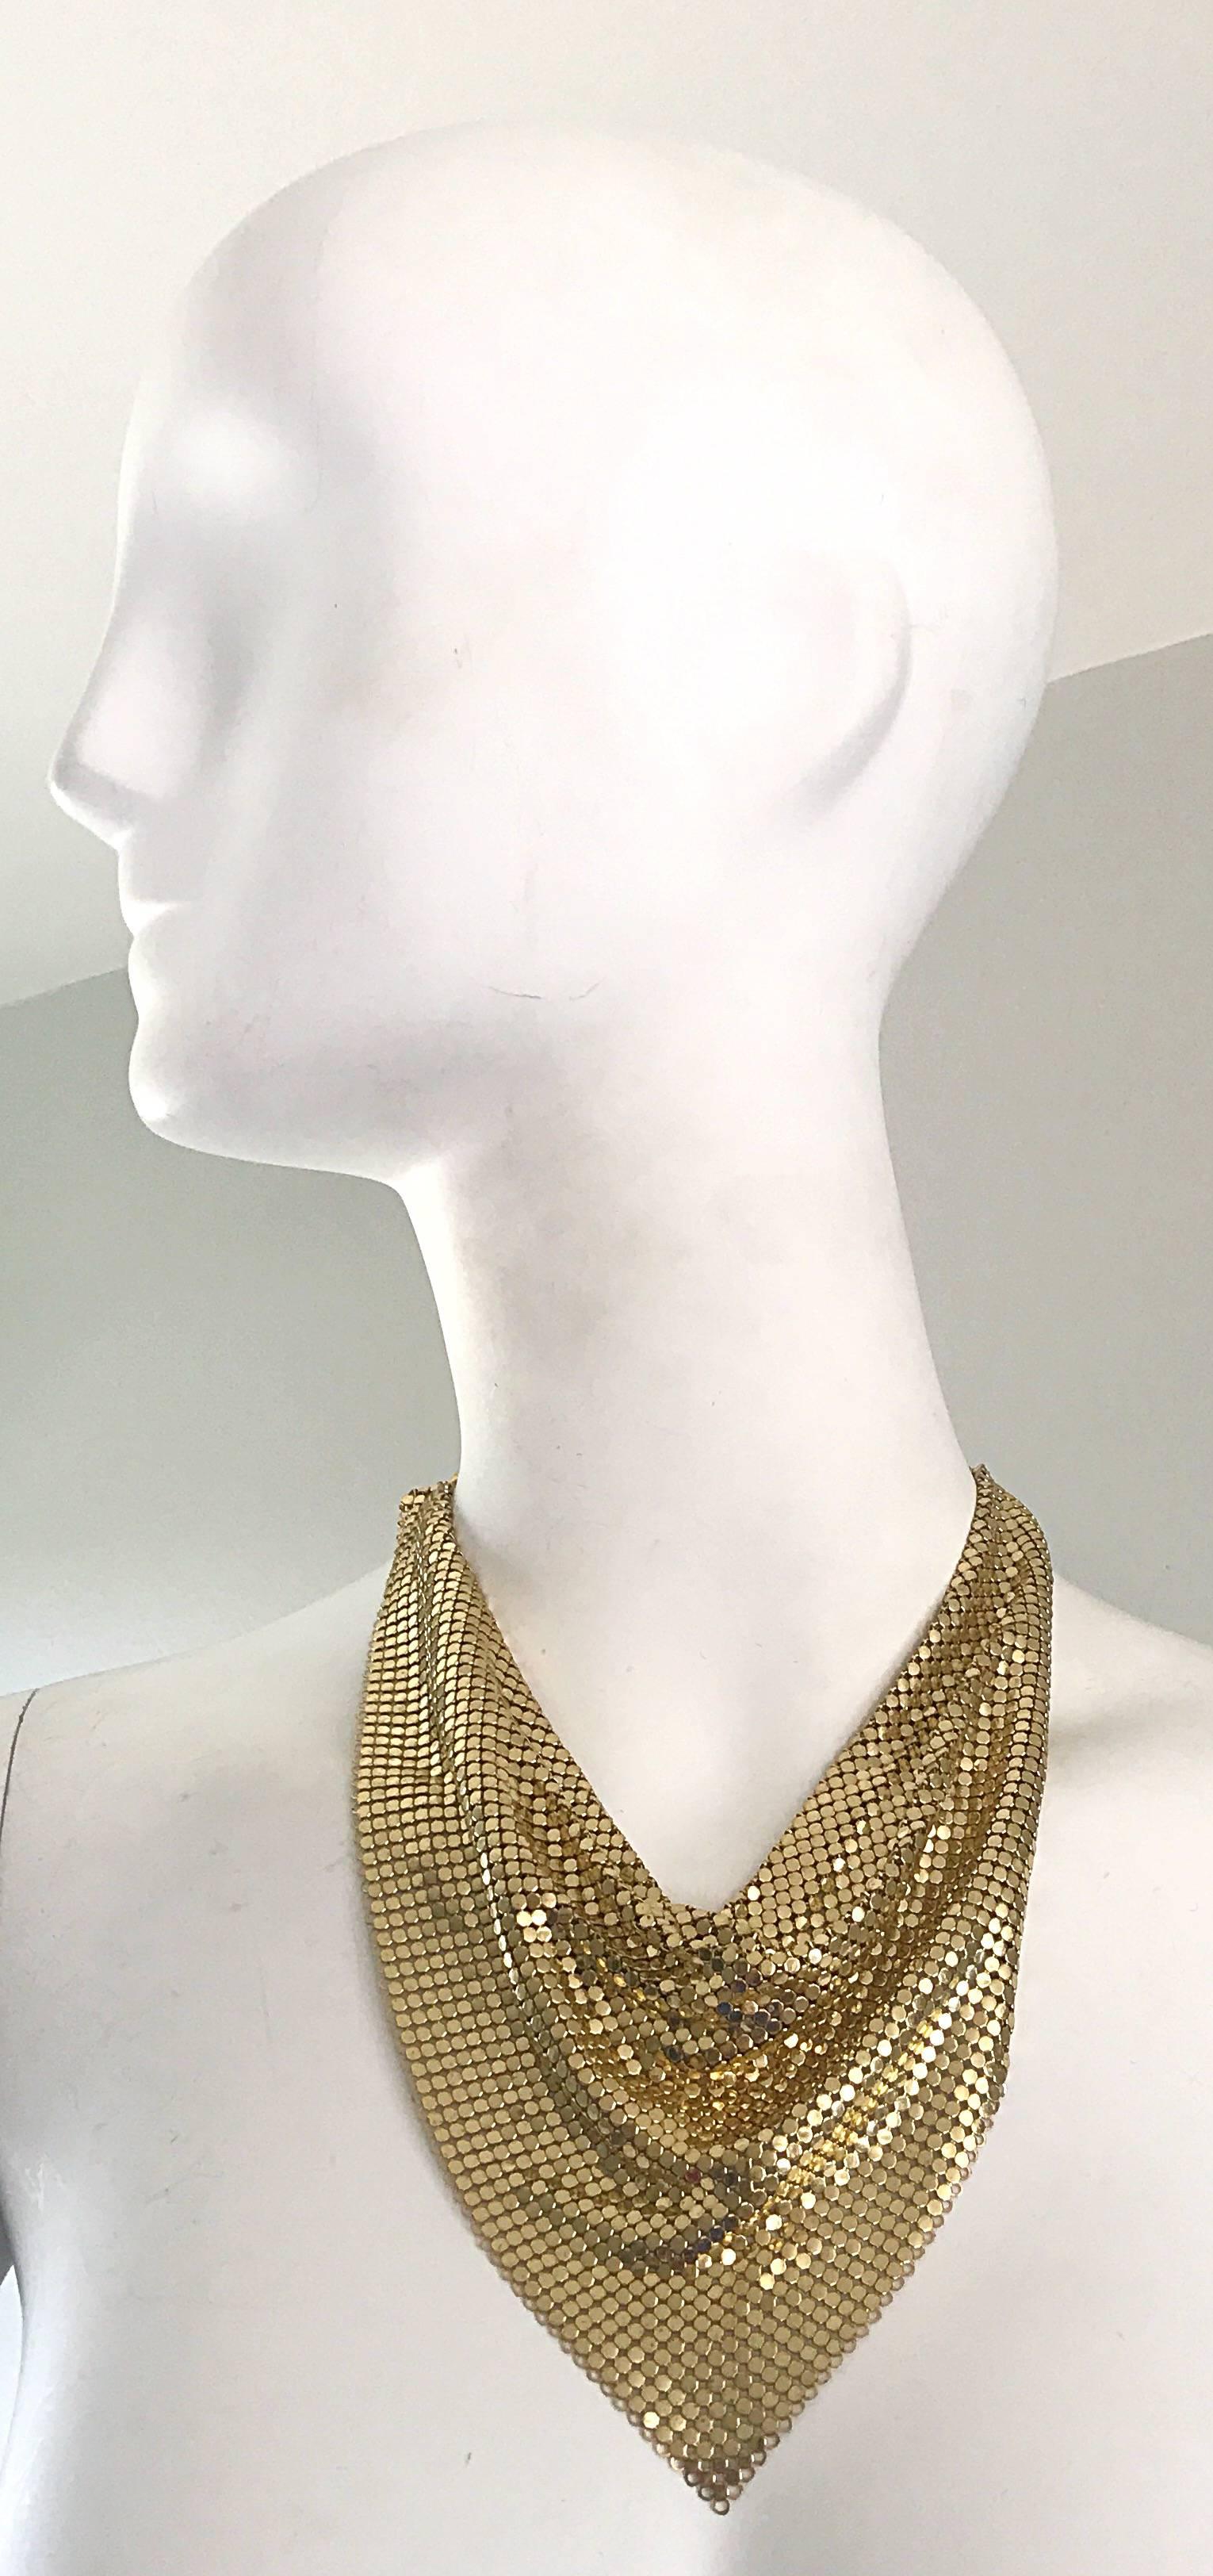 Amazing rare 1970s WHITING AND DAVIS gold metal mesh necklace bib necklace! Completely done in gold metal chainmail, with an adjustable clasp. Can be worn by any size. Great casual to dressy. In great condition.              Made in USA